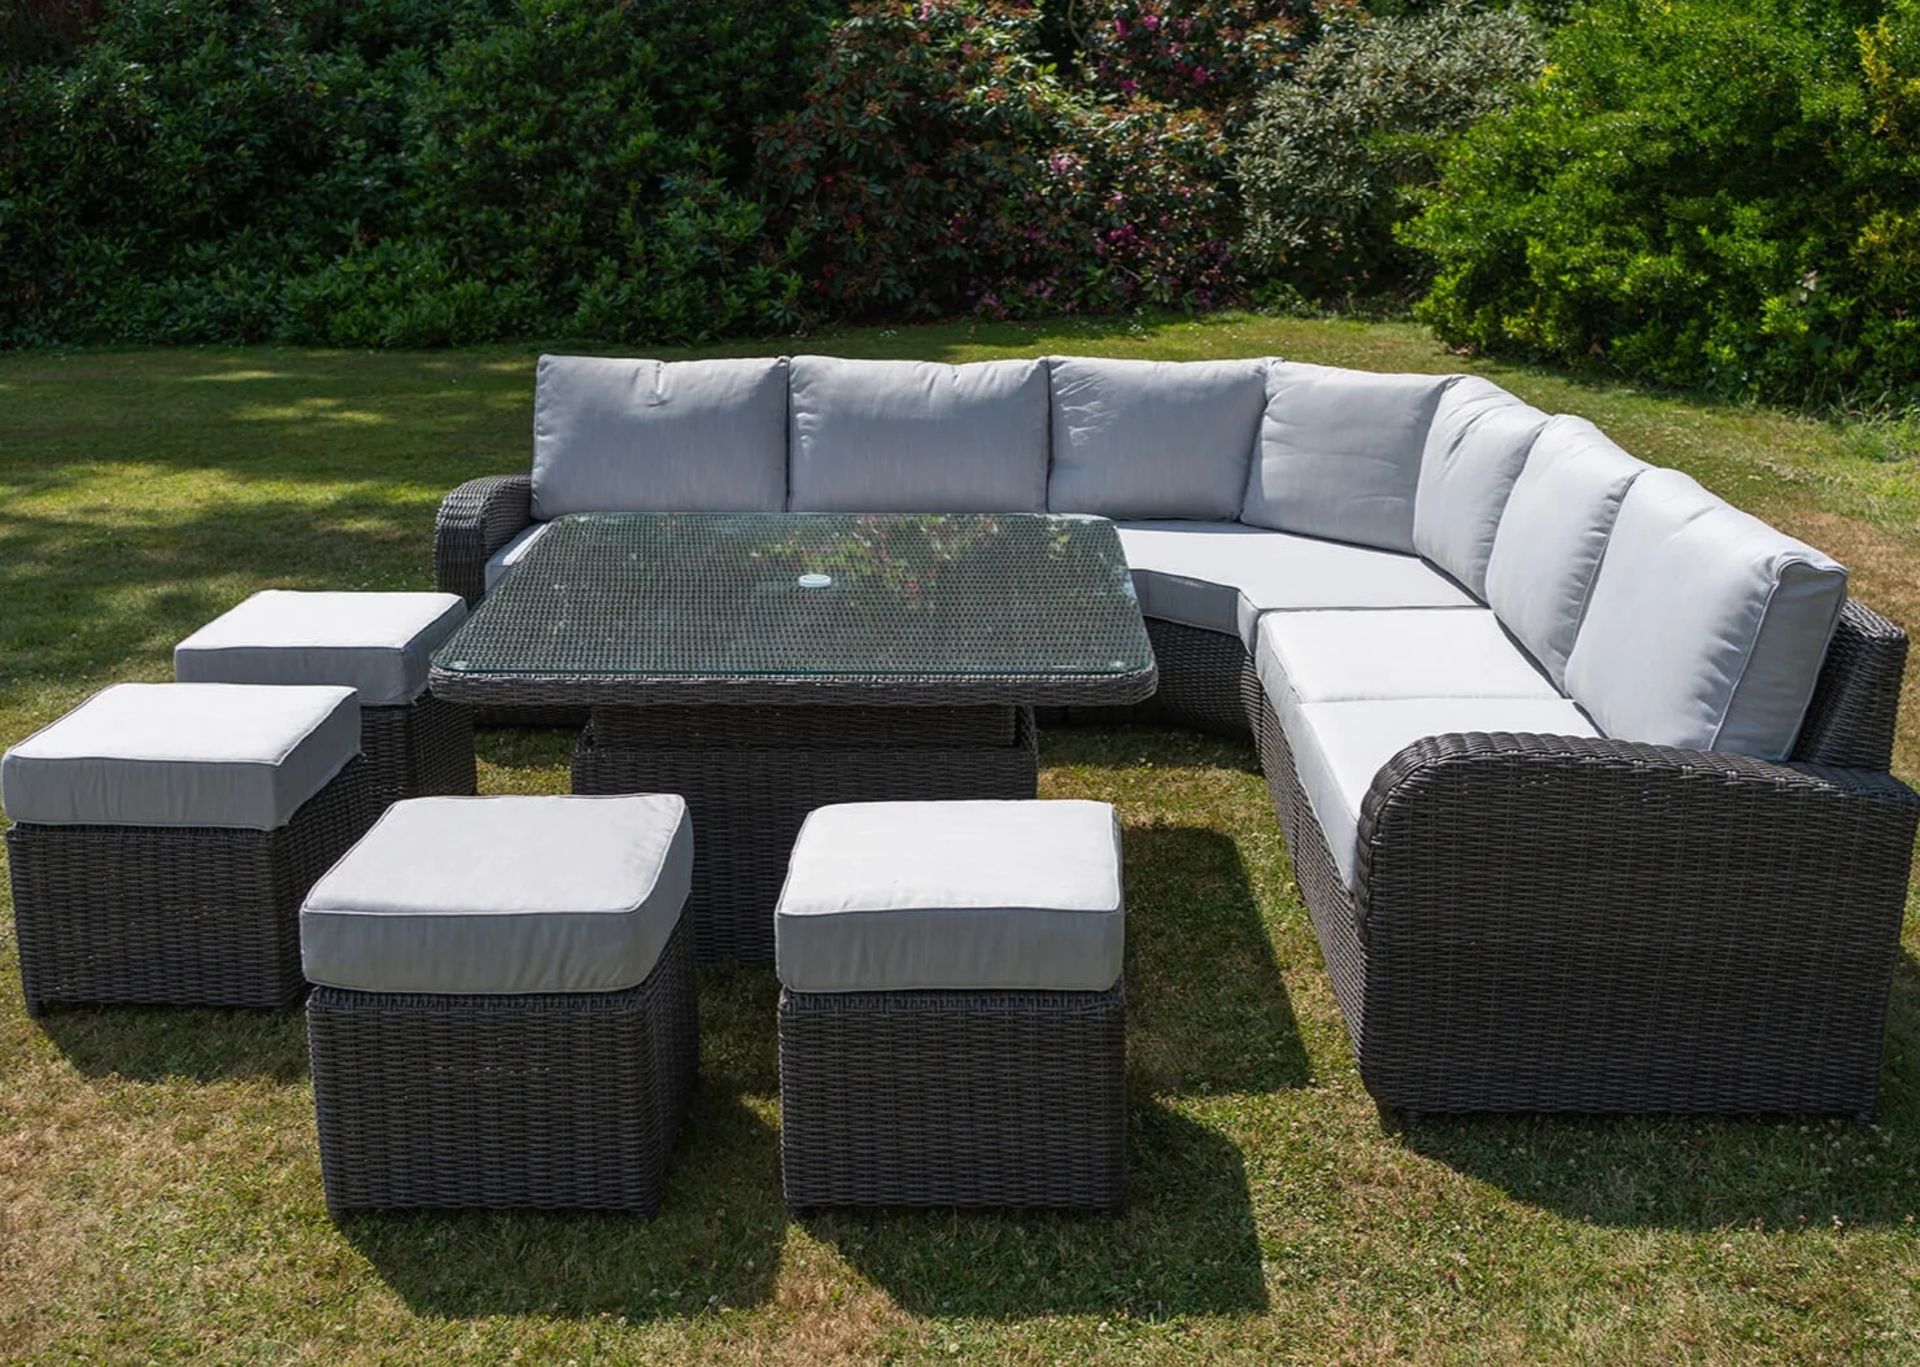 Brand New Moda Furniture, 10 Seater Outdoor Rise and Fall Table Dining Set in Natural with Cream - Image 3 of 9